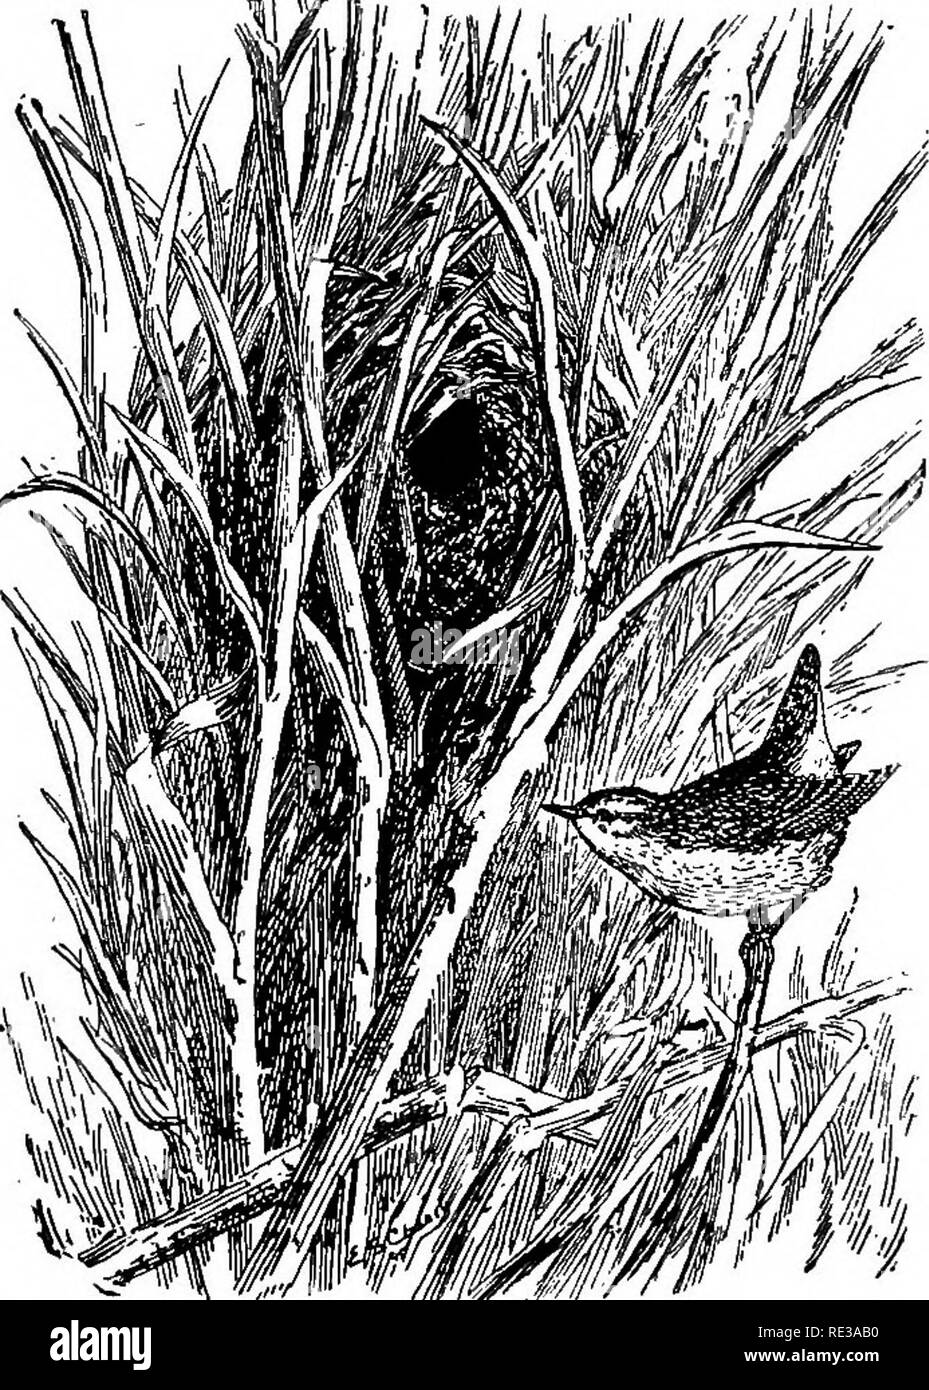 . Nests and eggs of North American birds. Birds; Birds. 7220. WESTERIT WINTER WREN. Troglodytes Jiiemalts pacifieus Baird. Geog. Dist.âPacific coast regioa from Sitka to Southern California; south, in winter to Western Mexico; east to Eastern Oregon, Nevada, etc. This subspecies breeds from the southern coast ranges of California- north to Sitka. Habits, nesting and eggs like those of T. hiemalis of the East. Eggs .60x.48. 723. ALASKAN WREN. Troglodytes alascensis Baird. Geog. Dist.âAleutian, and Pribilof Islands, Alaska. &quot;In a small collection of birds' skins, nests and eggs recently acq Stock Photo